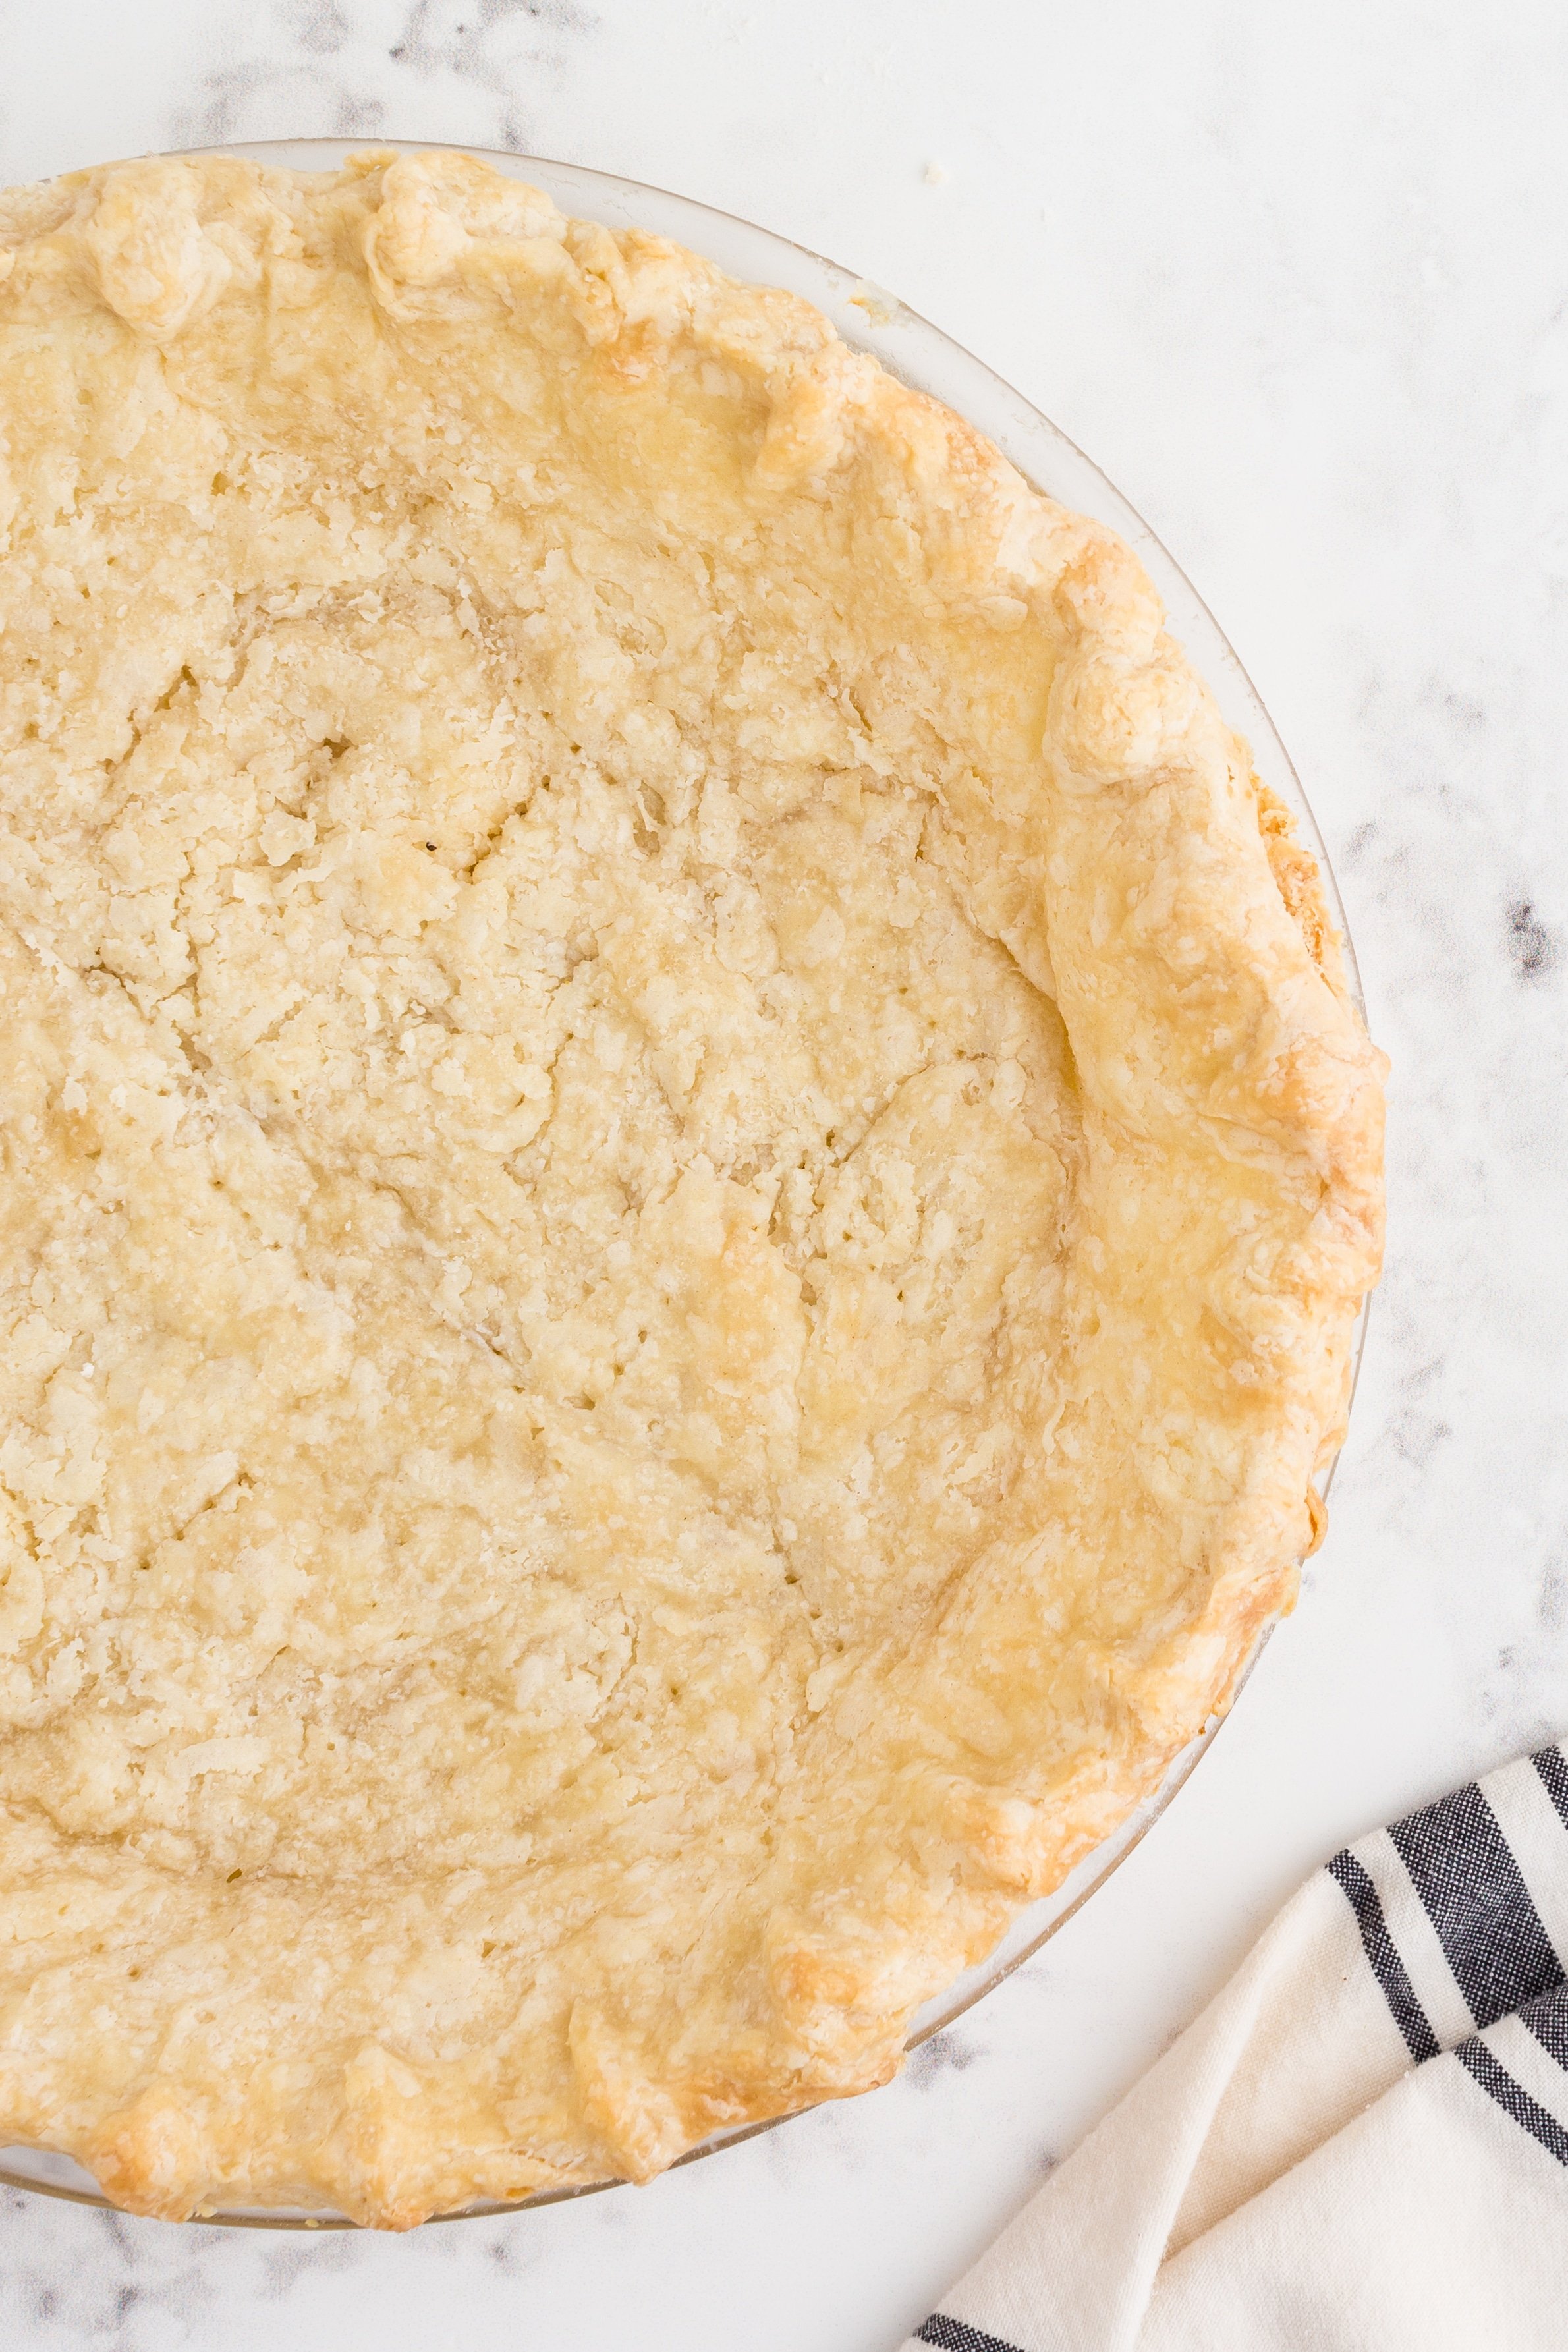 Baked butter pie crust dough in glass pie dish on marble countertop, striped kitchen linen